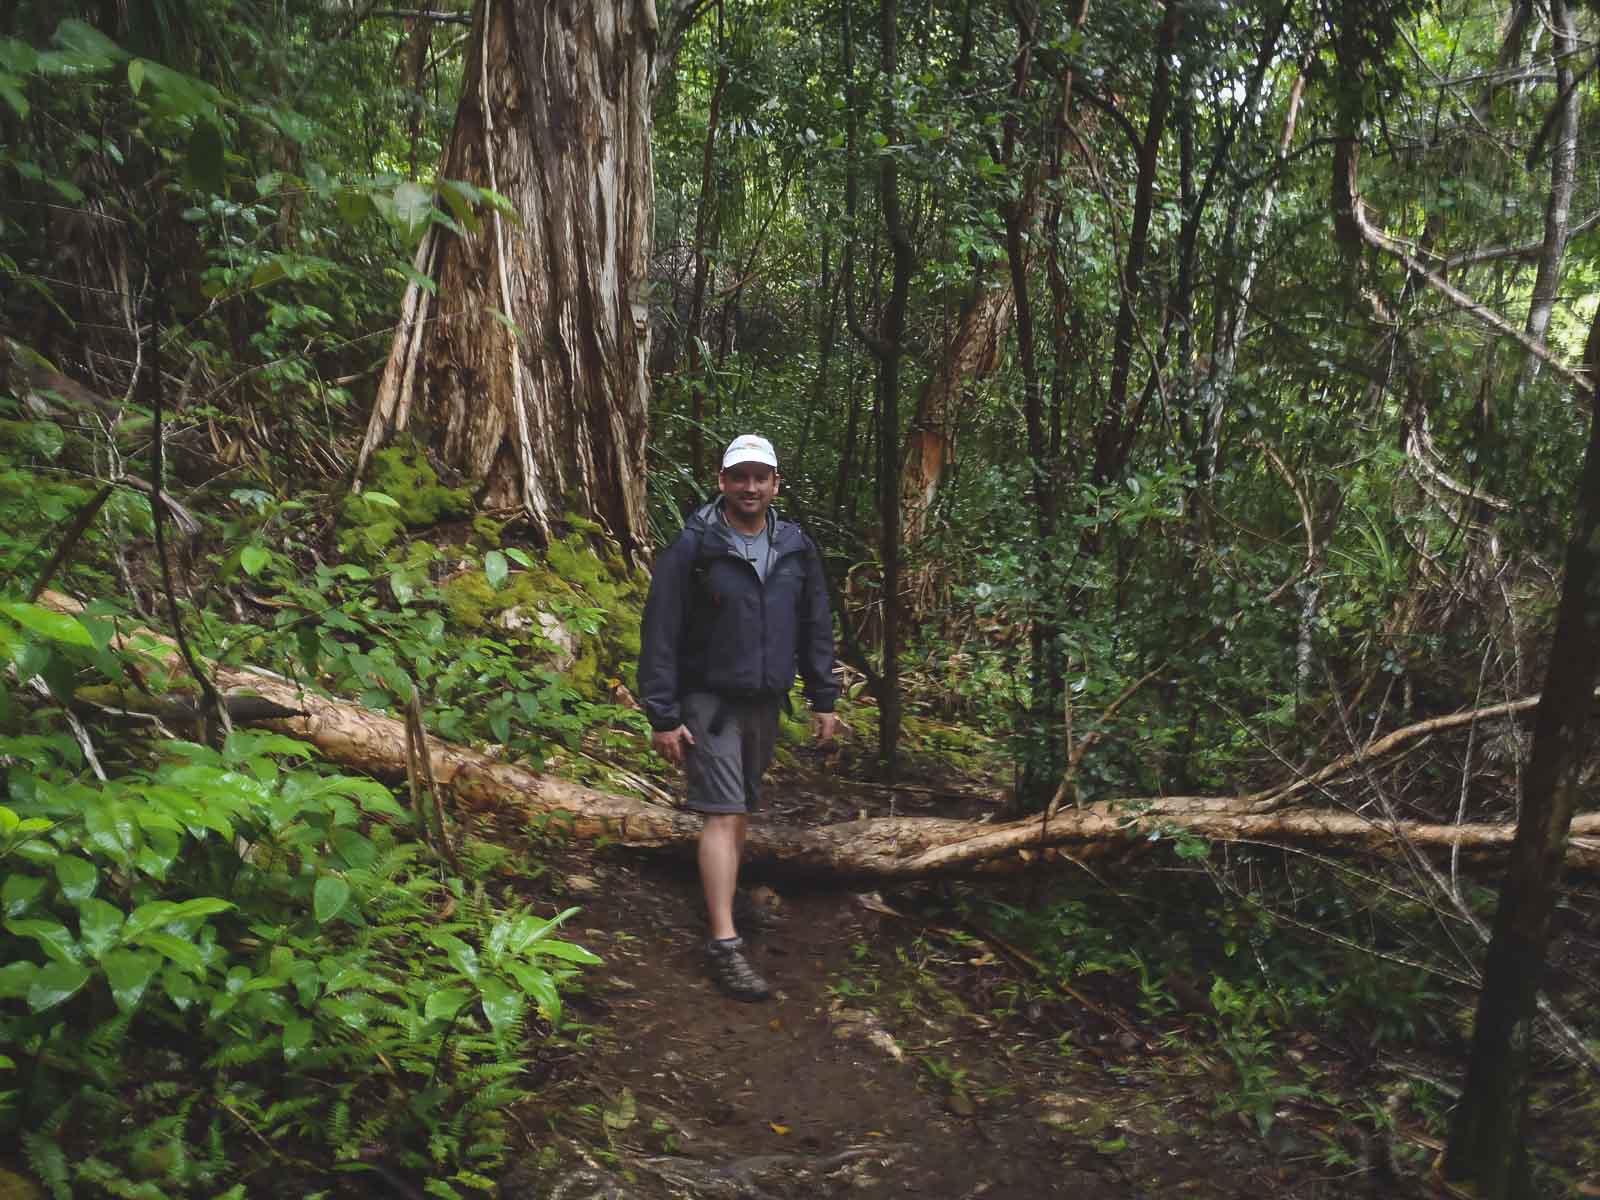 Questions about hikes in Hawaii